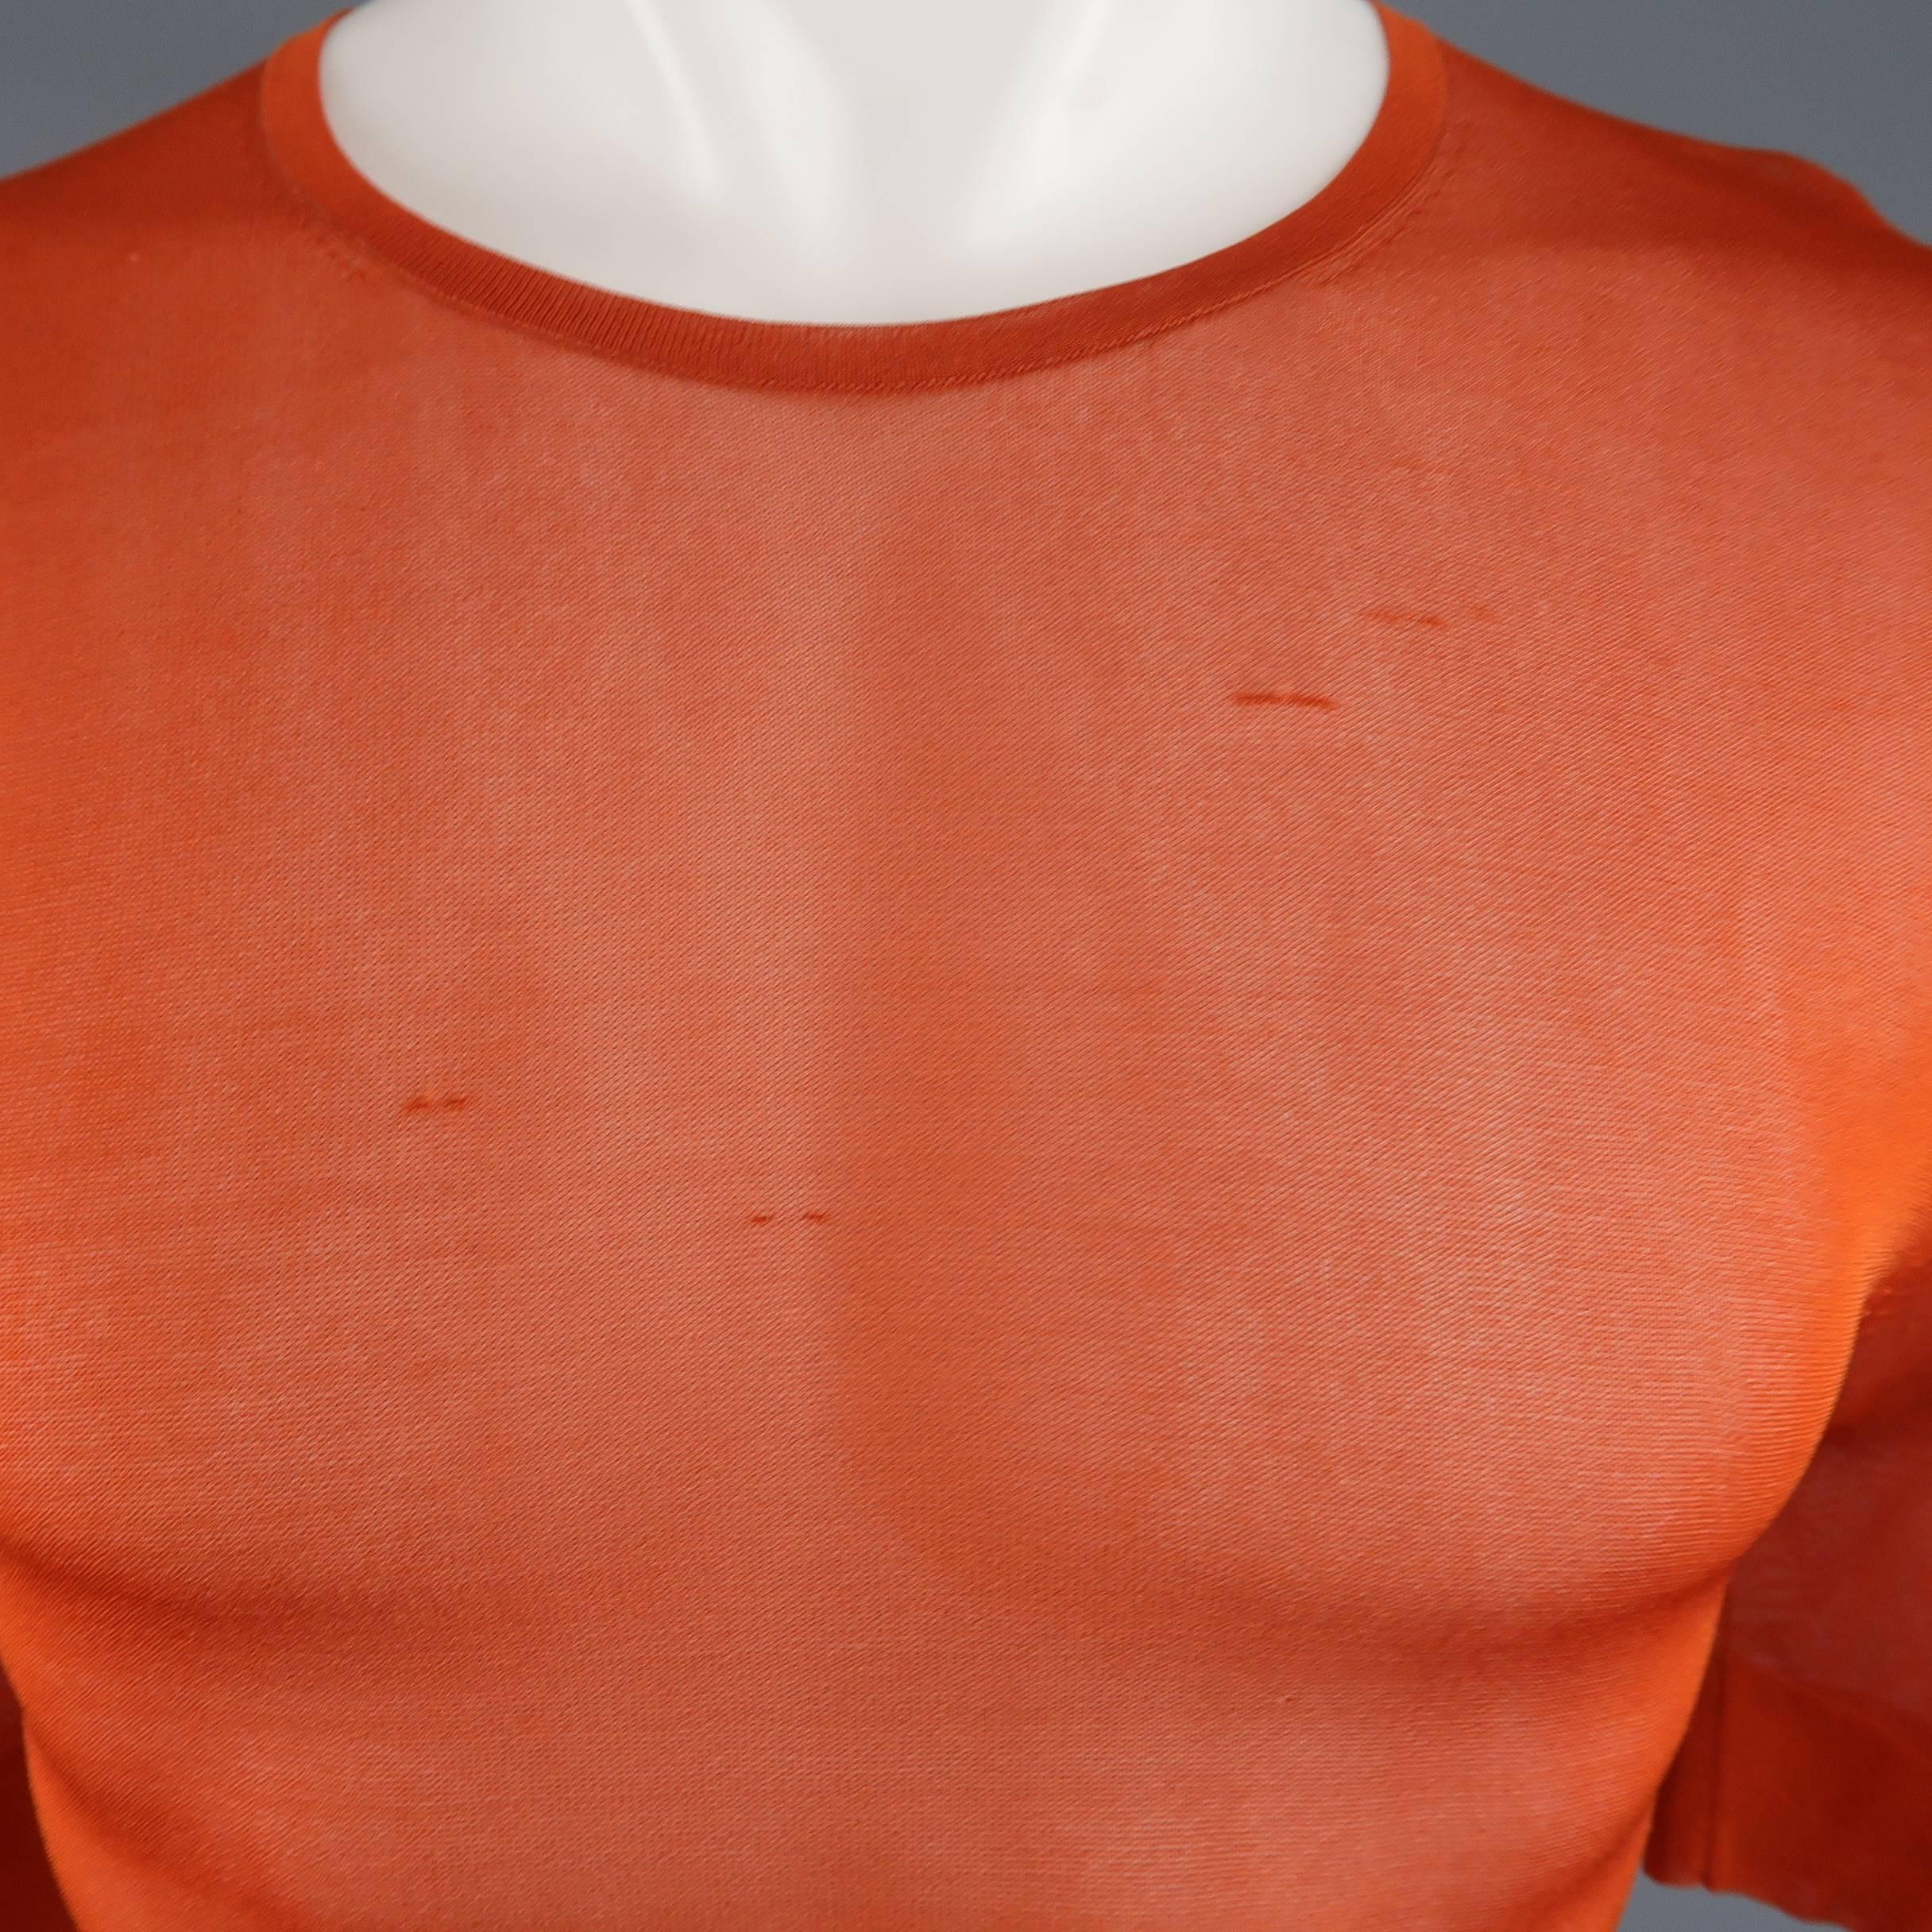 DRIES VAN NOTEN short sleeve pullover comes in a metallic burnt orange sheer mesh knit with a round neck and thick bands. Minor imperfections. As-Is. Made in Belgium.
 
Good Pre-Owned Condition.
Marked: Large
 
Measurements:
 
Shoulder: 18